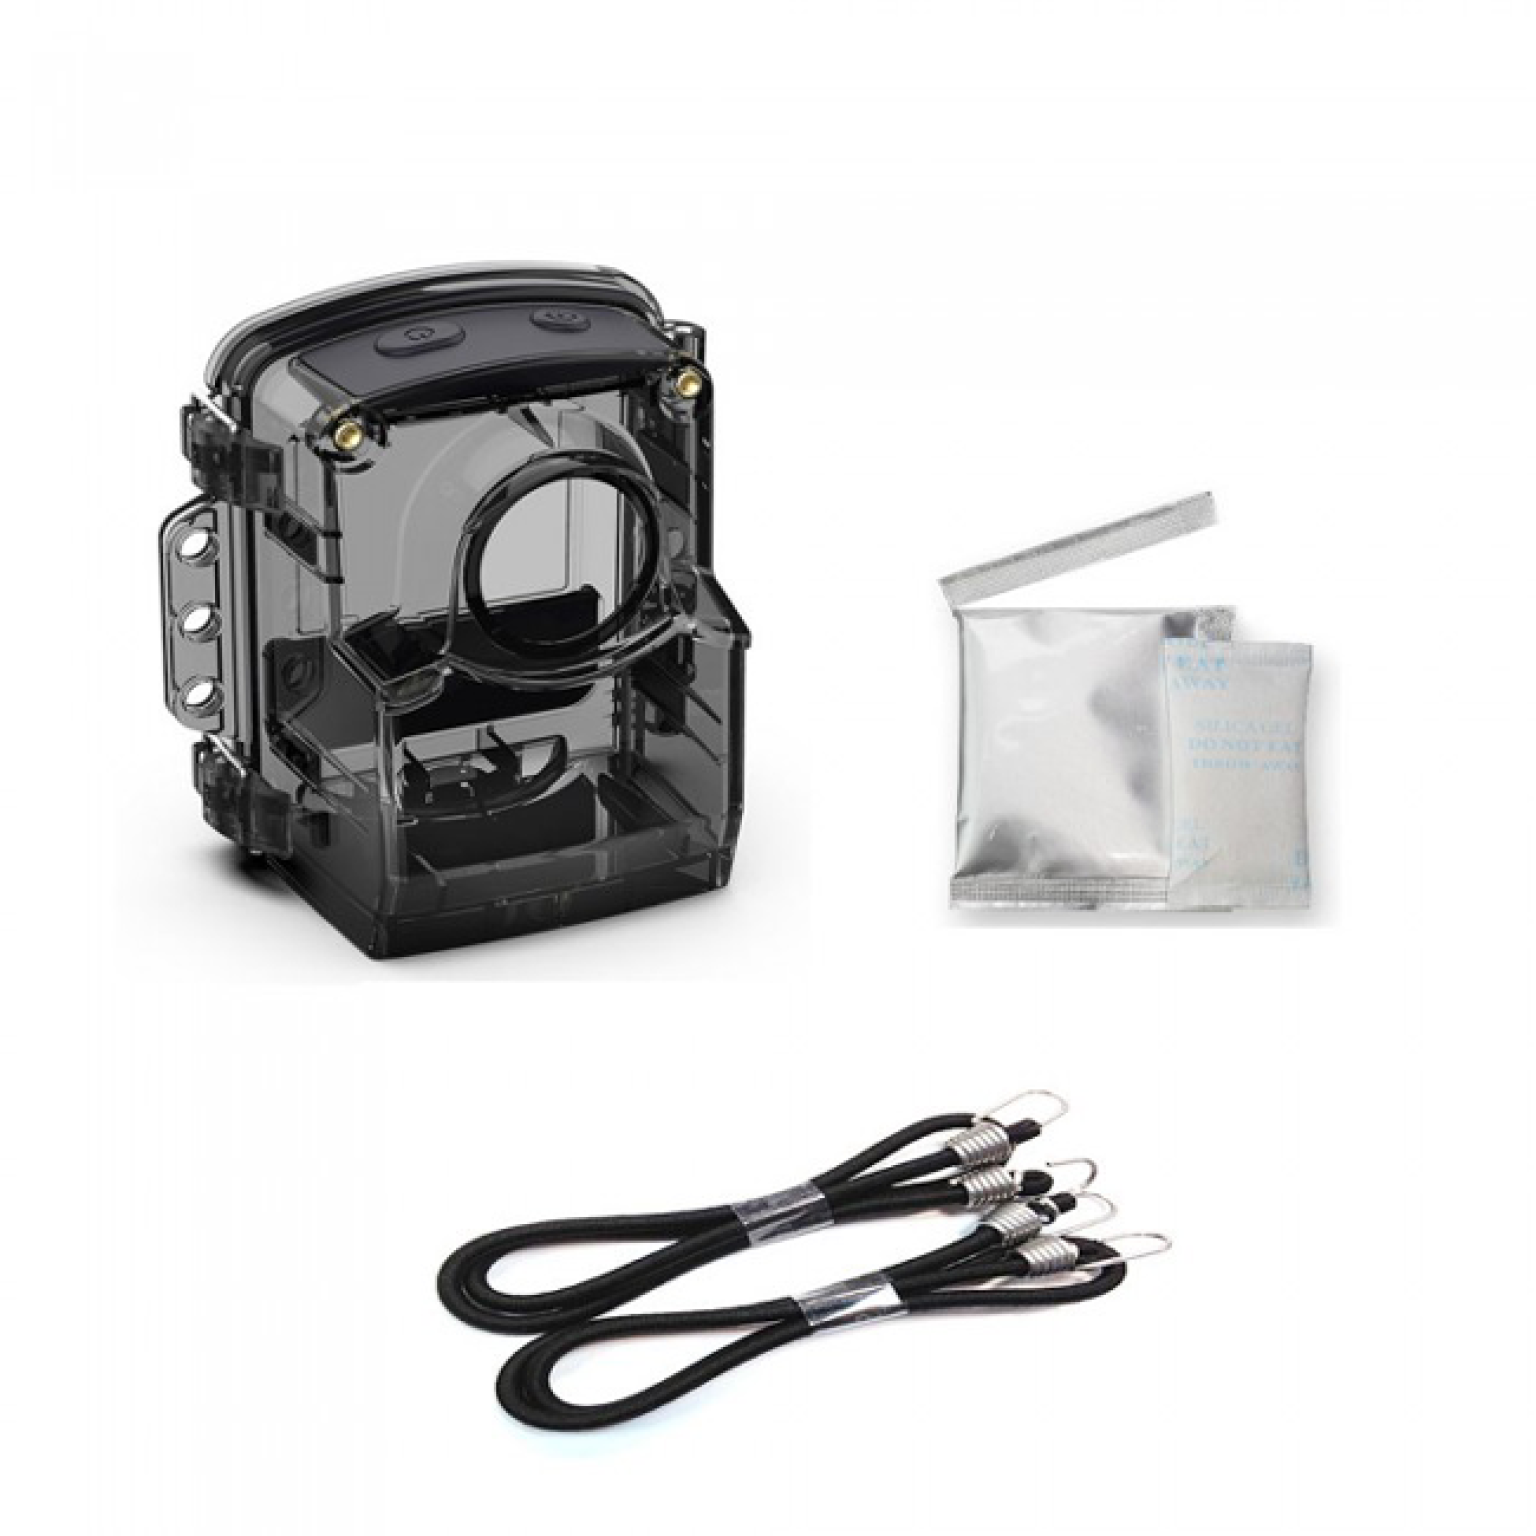 Waterproof frame for time lapse camera Brino model ATH1000 3